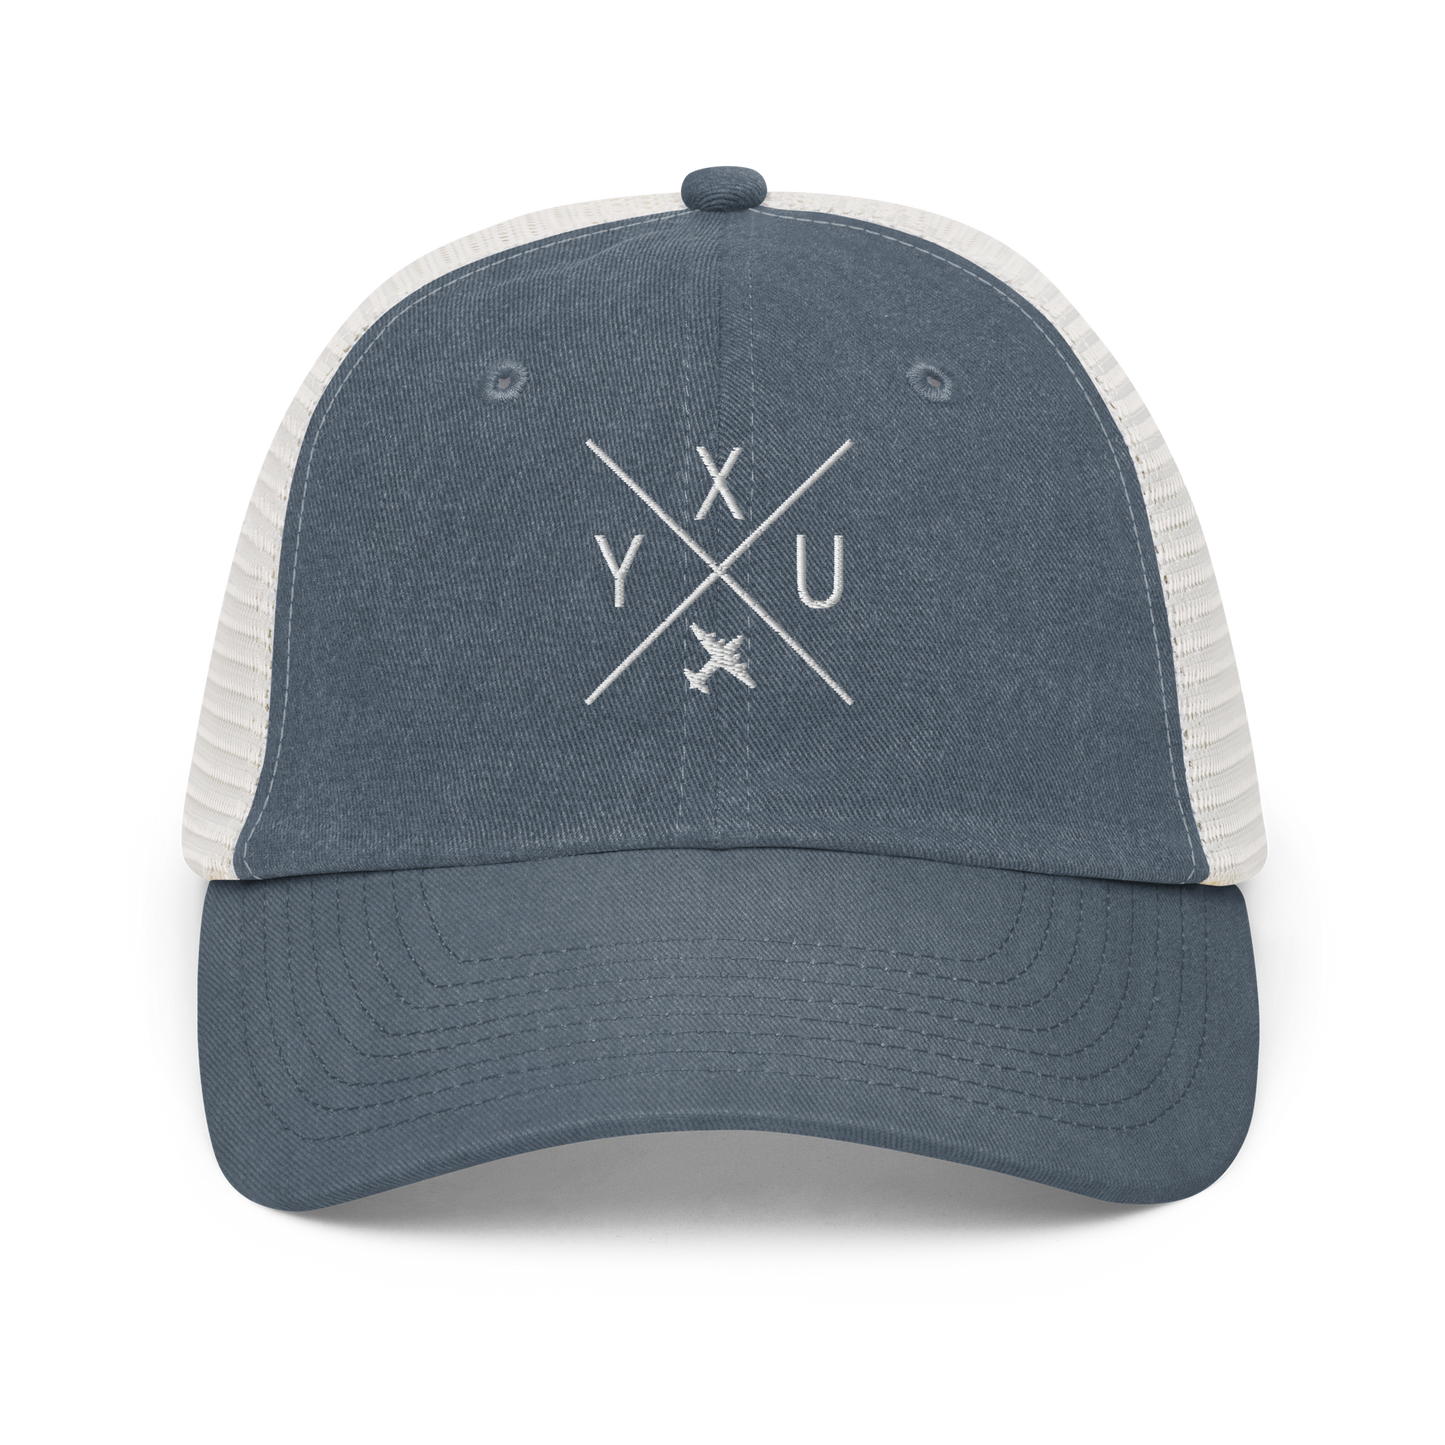 YHM Designs - YXU London Pigment-Dyed Trucker Cap - Crossed-X Design with Airport Code and Vintage Propliner - White Embroidery - Image 06